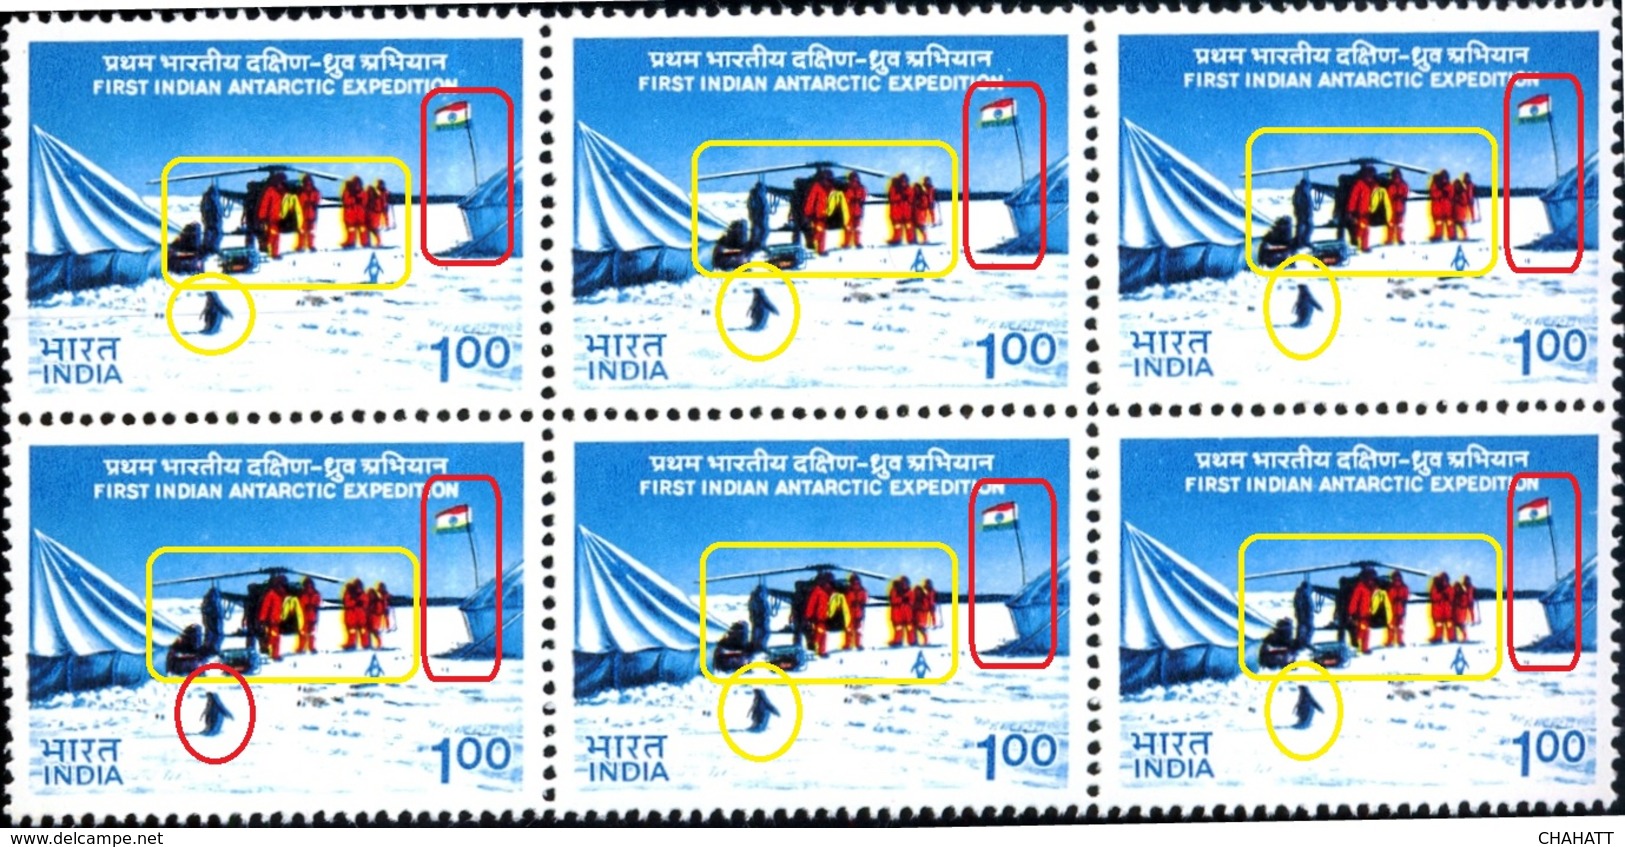 FIRST INDIAN ANTARCTIC EXPEDITION-PENGUINS-INDIAN FLAG-HELICOPTERS-ERROR-BLOCK OF 6-INDIA-1990-RARE-MNH-B9-873 - Research Programs